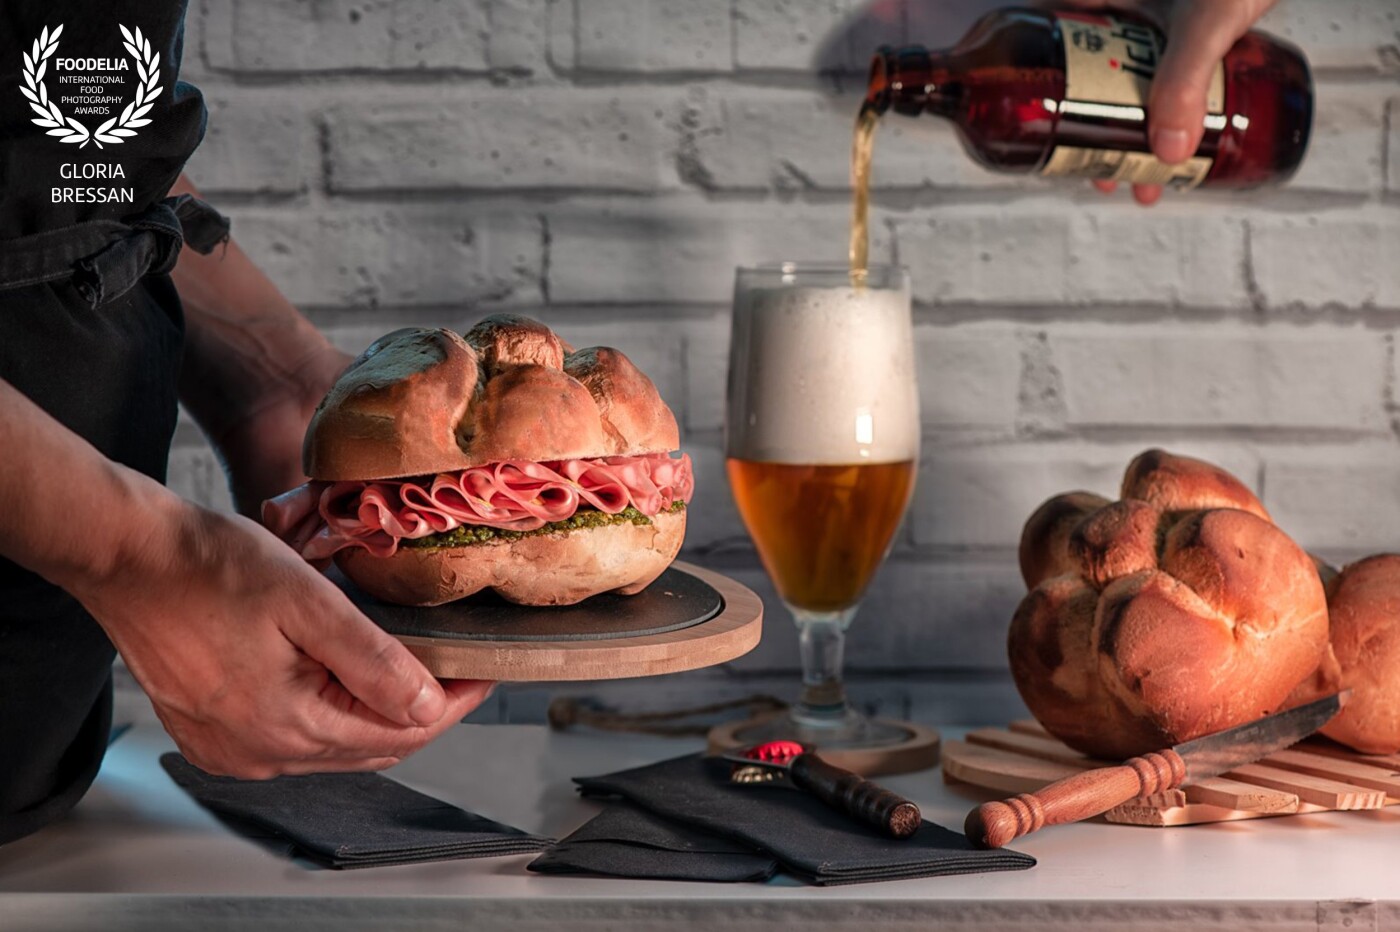 It is a long time  that I want to make this picture with my typical and favourite Italian bread with mortadella and Pesto. During the summer in Italy a "micchetta con mortadella" and a beer is a must! I Use only a pocket soft light in the right and that's it!